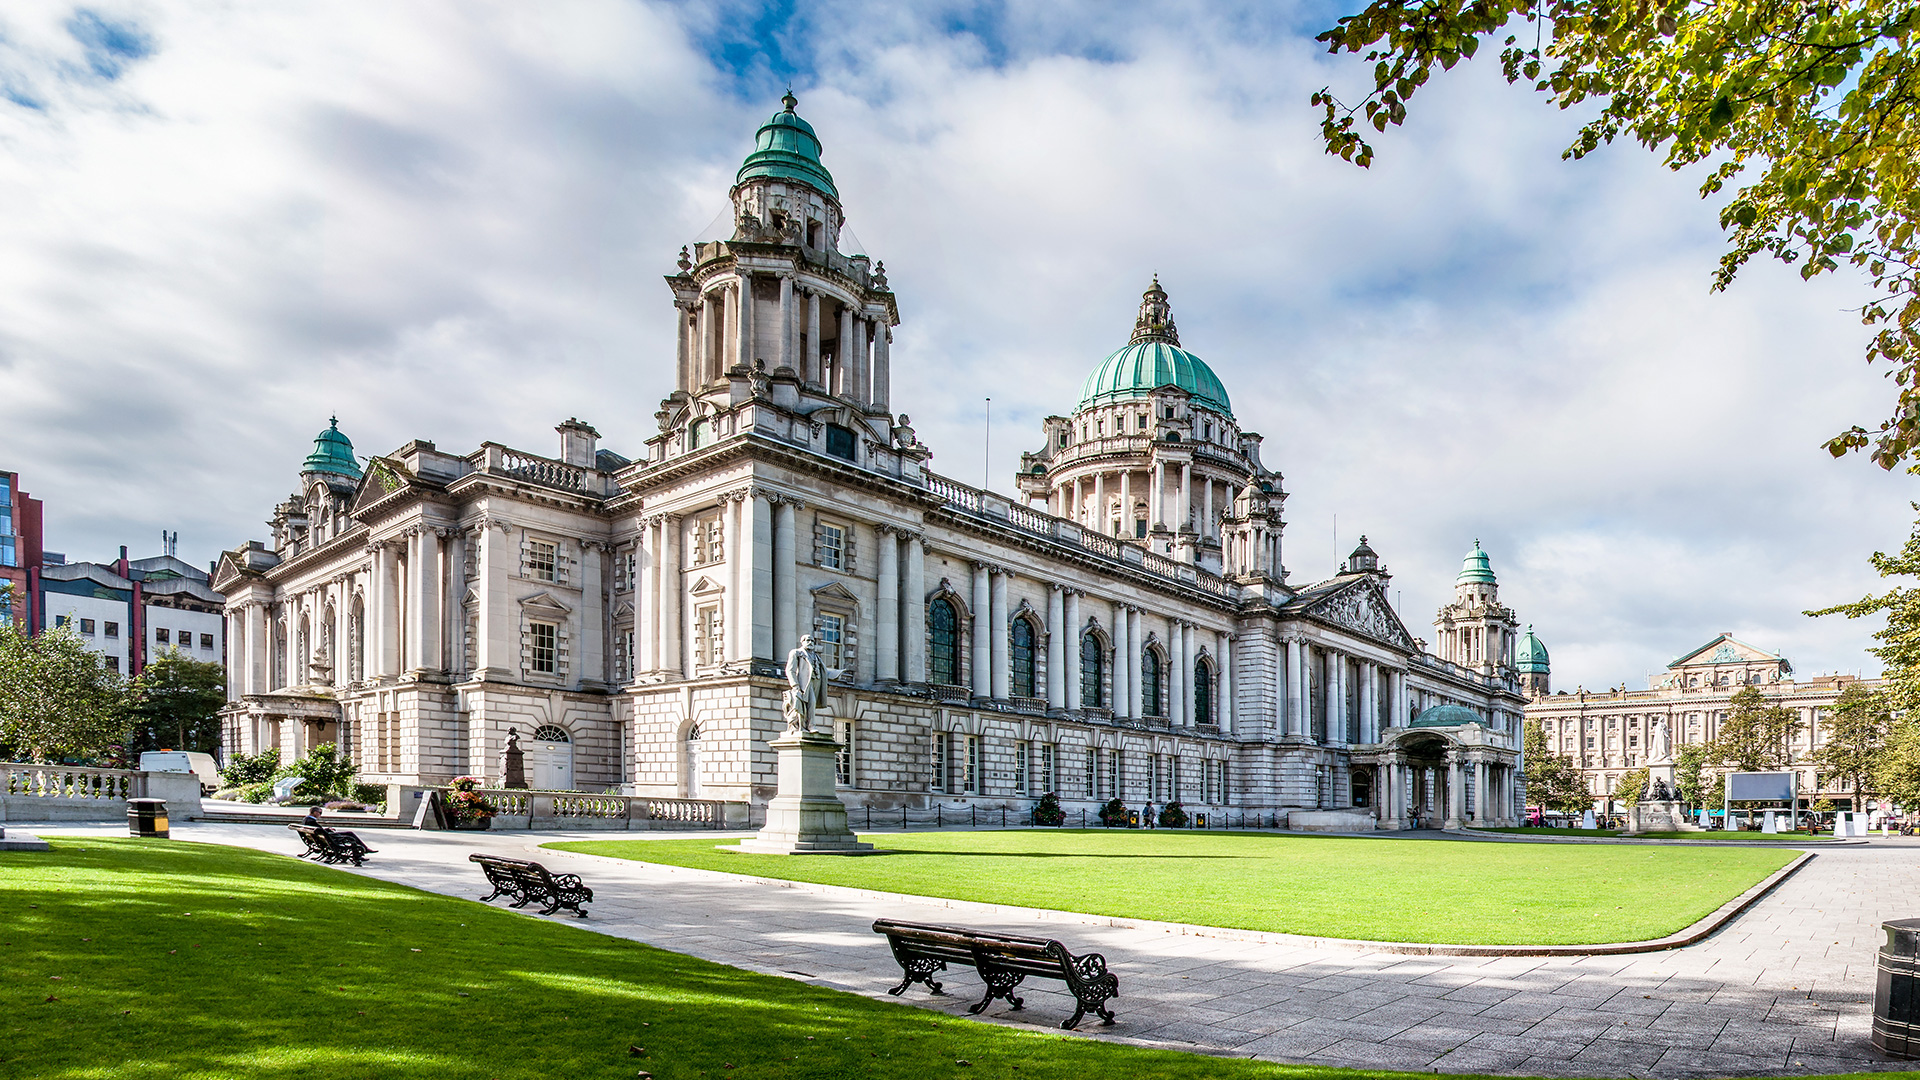 Belfast is the ideal city for a break. It has live music, great food and lots of fun.